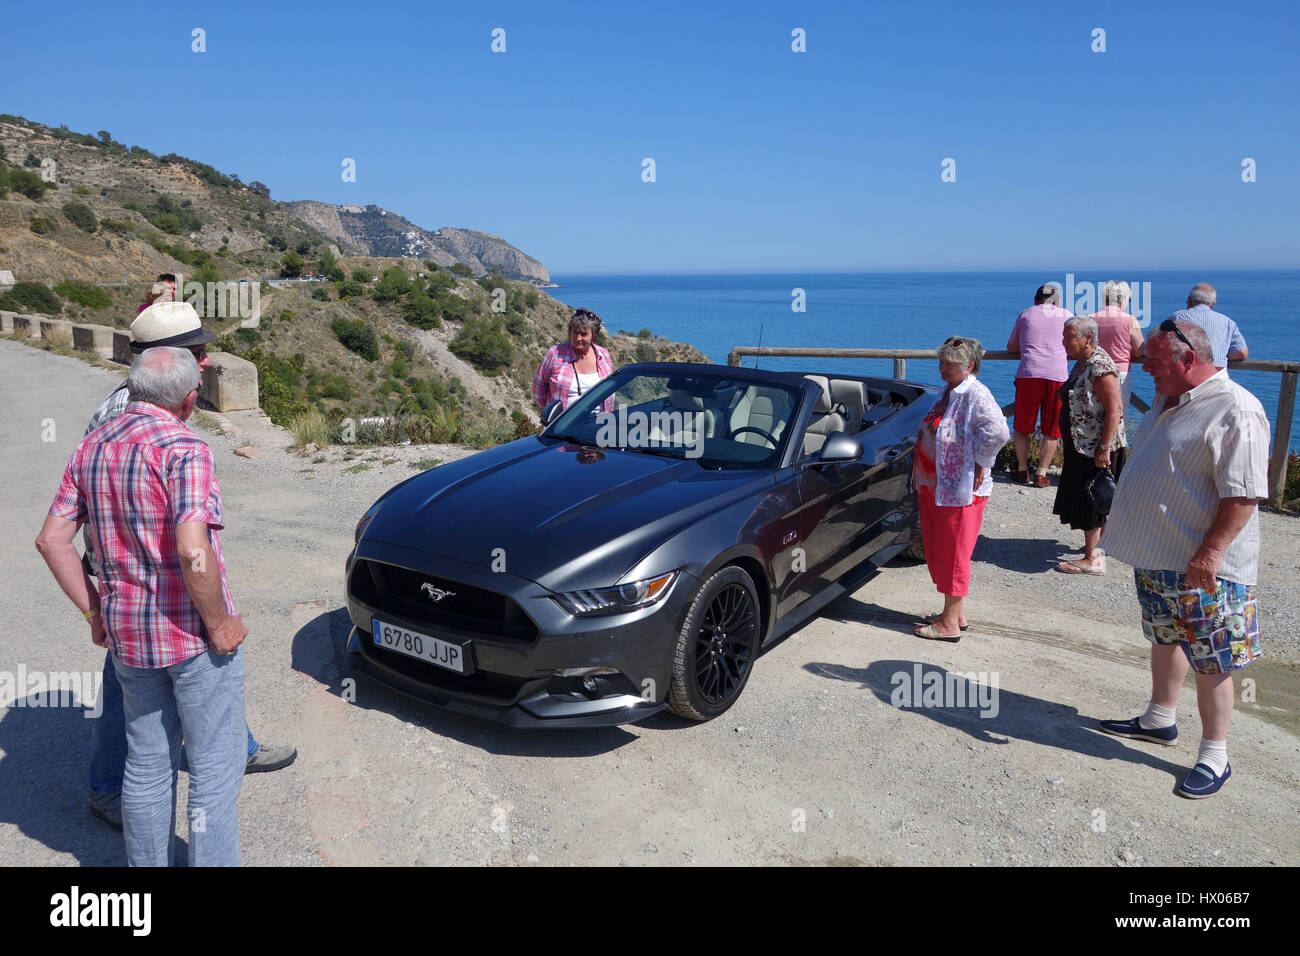 Convertable Ford Mustang 5 Litre V8 Eye catching crowd pulling car Ford Mustang Stock Photo